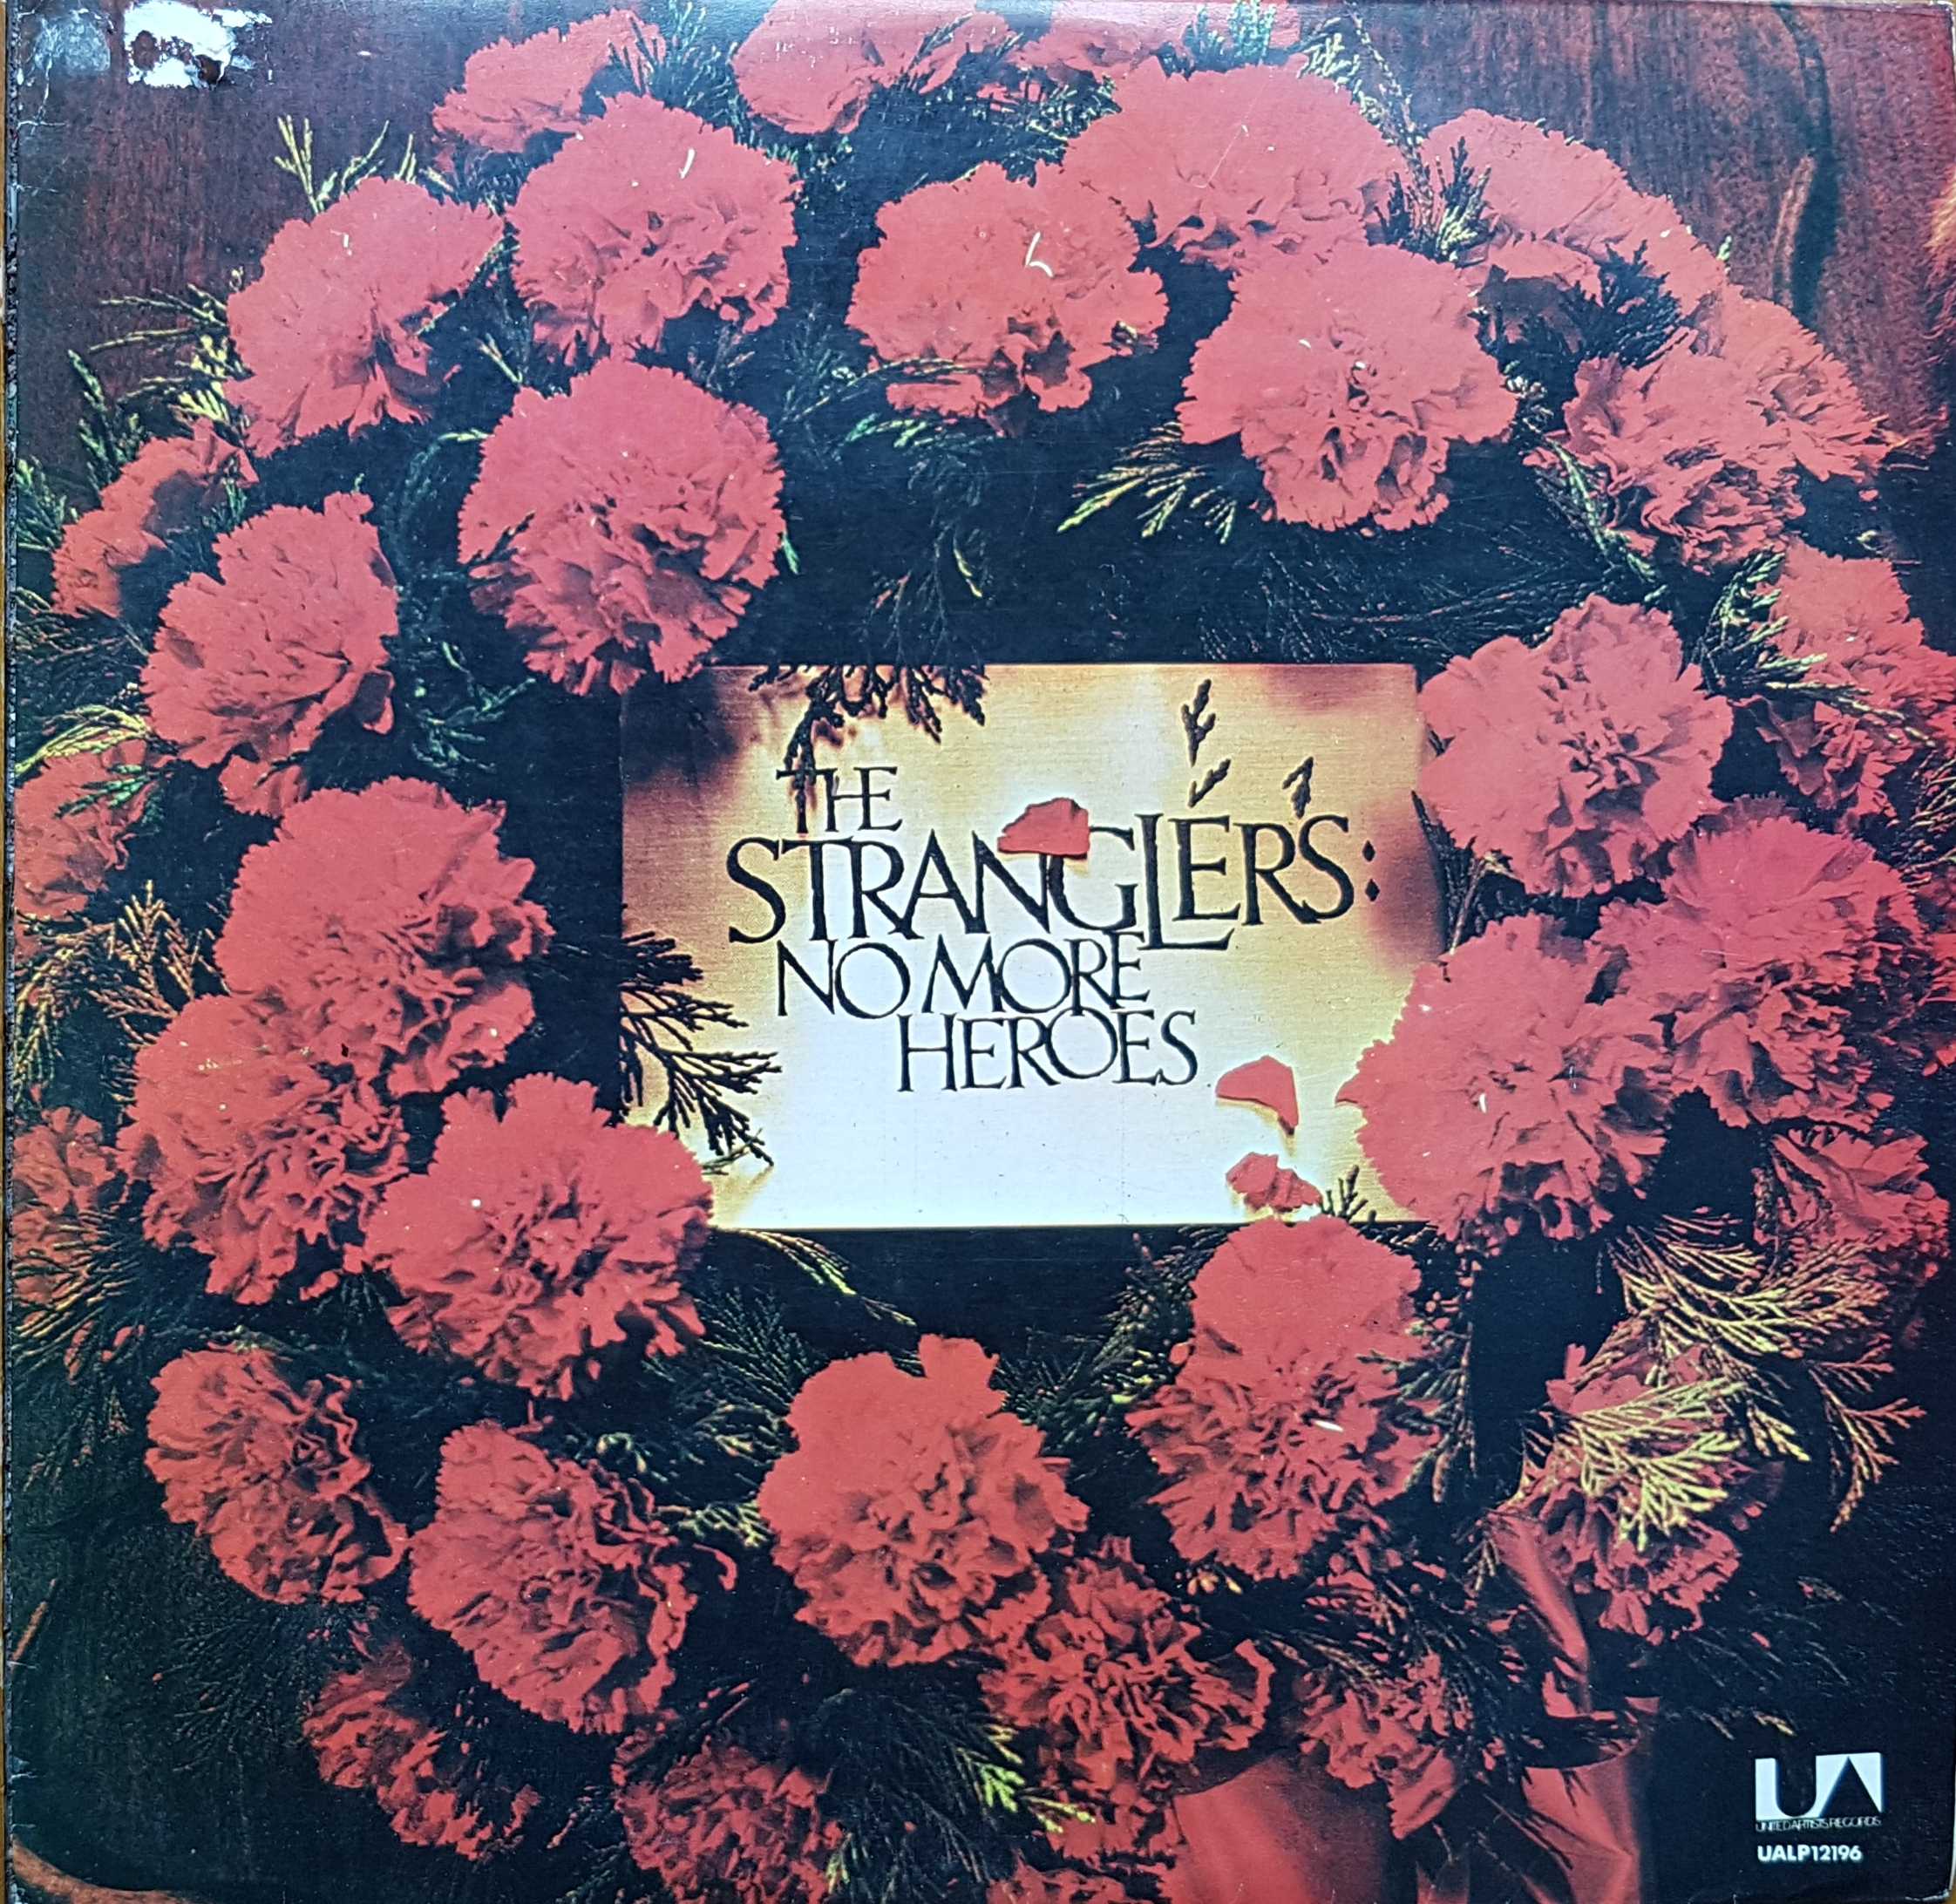 Picture of SP 4659 No more heroes by artist The Stranglers